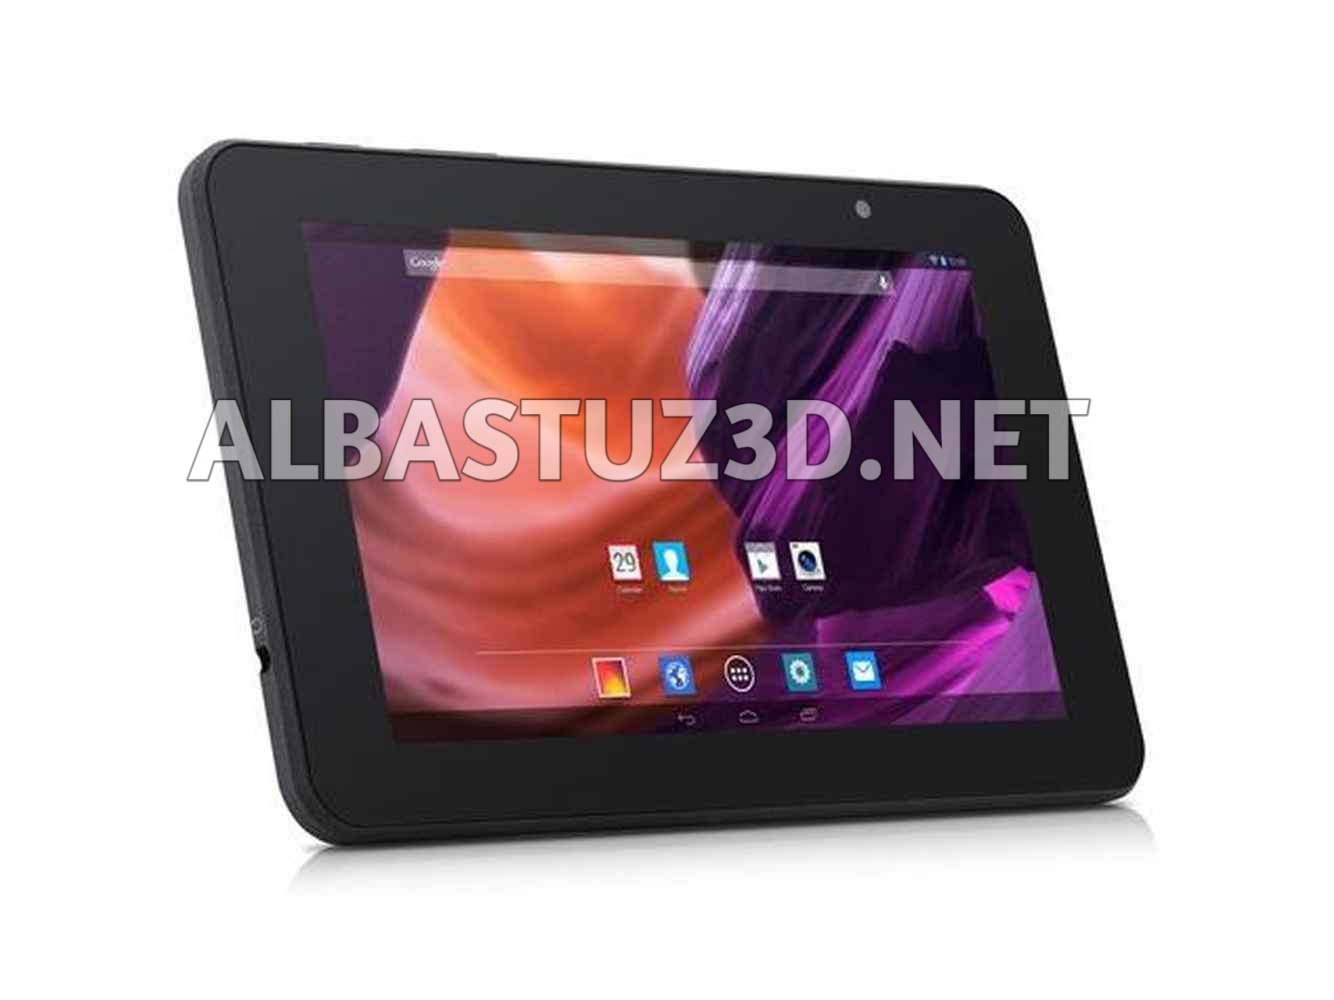 How to Hard Reset or Factory Reset ALCATEL One Touch Tab 7 - ALBASTUZ3D